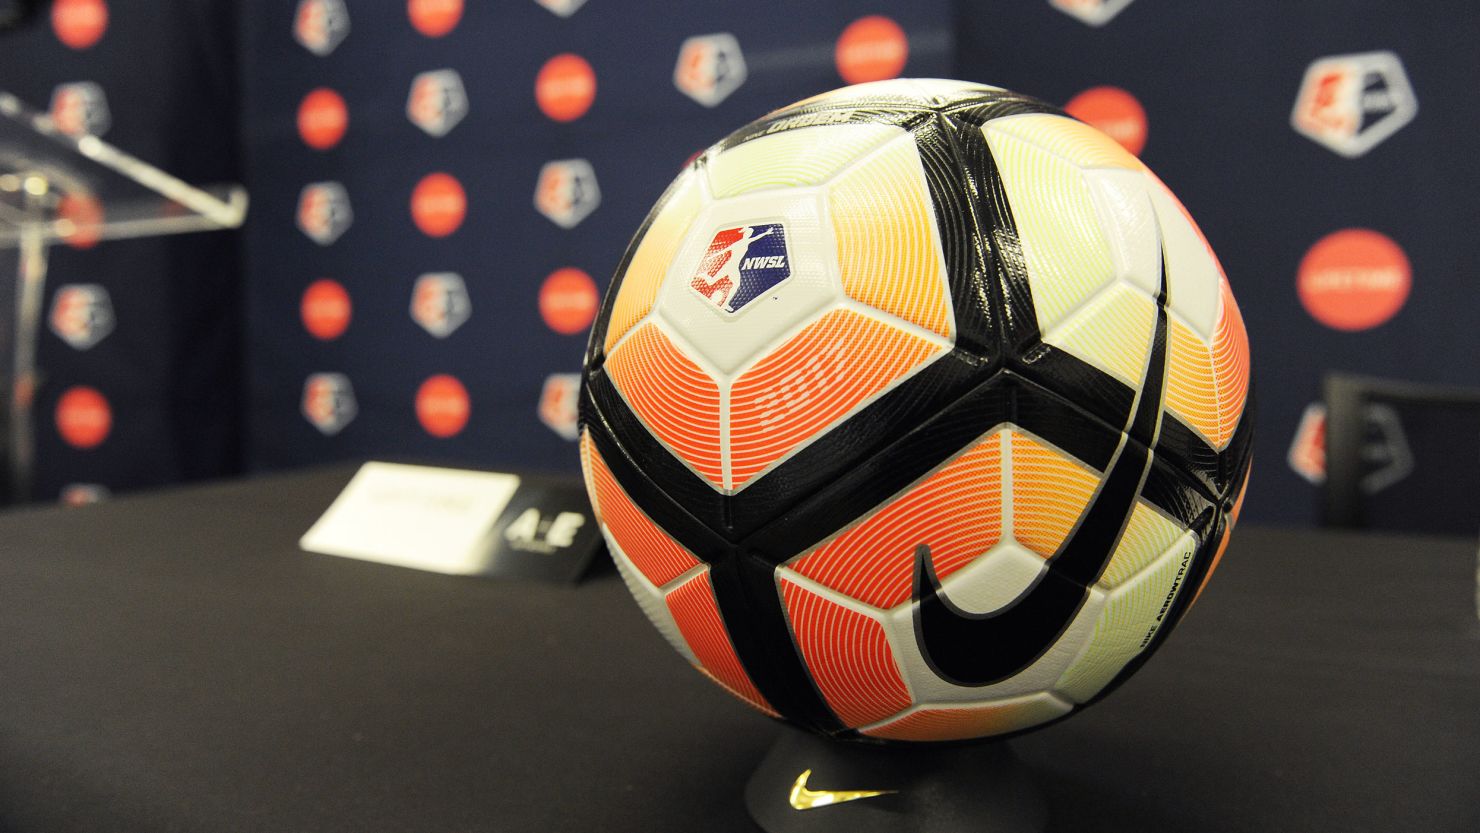 A soccer ball is pictured during the Lifetime National Women's Soccer League on February 2, 2017, in New York City.